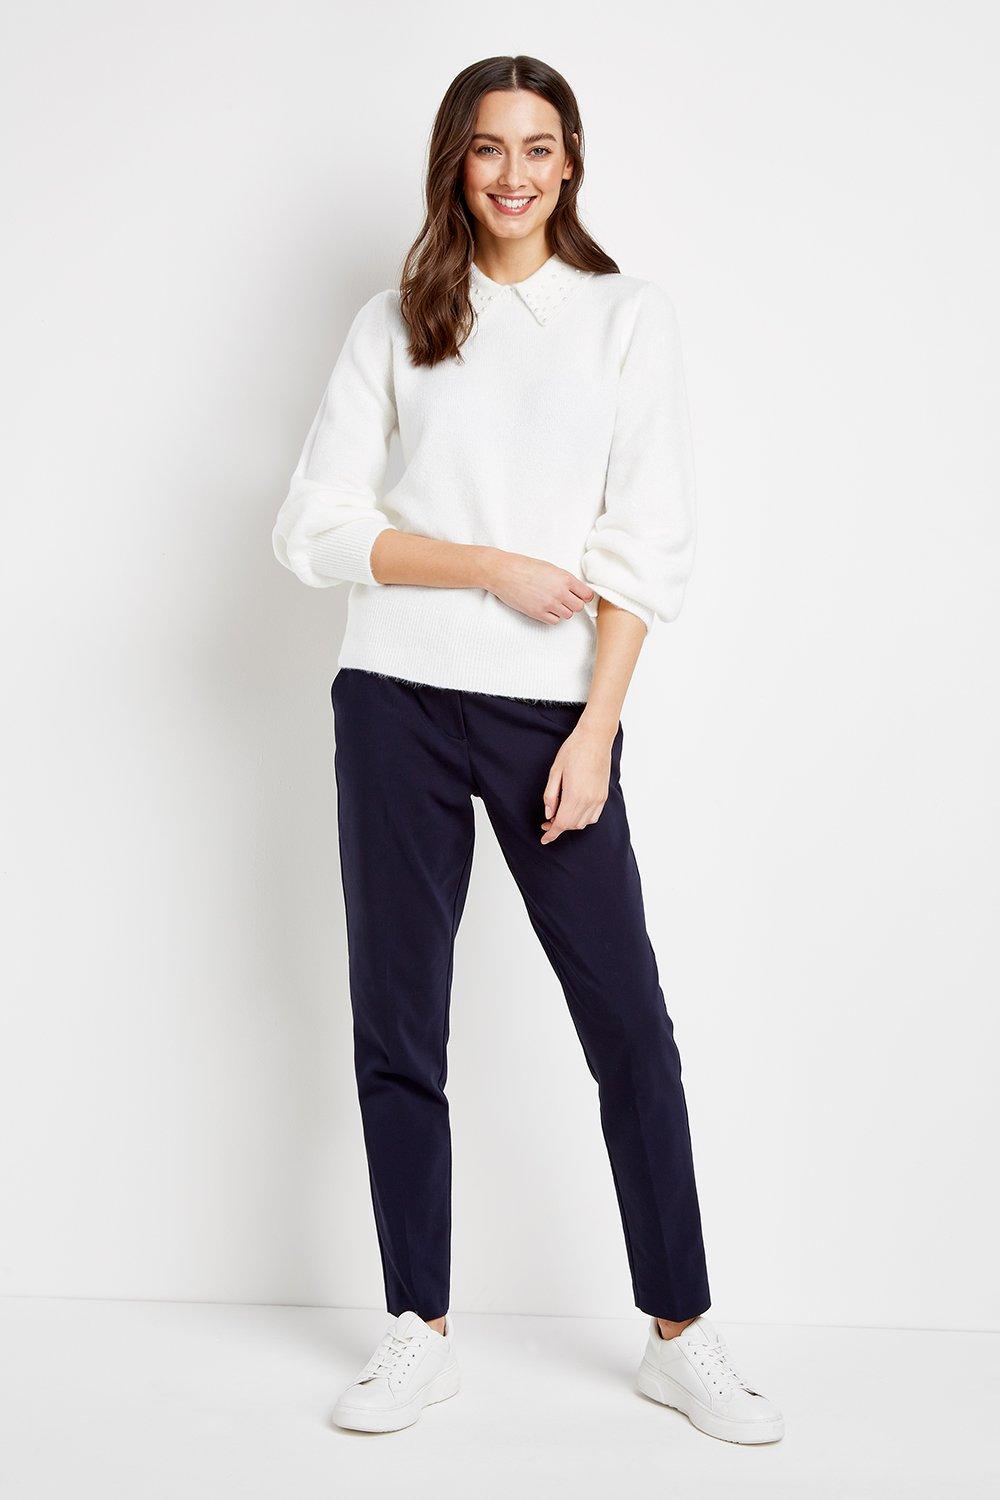 Refresh Your Wardrobe Staples With These Classic Navy Trousers. A Deep Navy Hue Is Sophisticated And Easy To Pair, Whilst A Tapered Leg Is Sure To Flatter.&Nbsp; Team With A White Shirt And Heels For A Chic, Versatile Look.  Trousers Cigarette Casual  49%